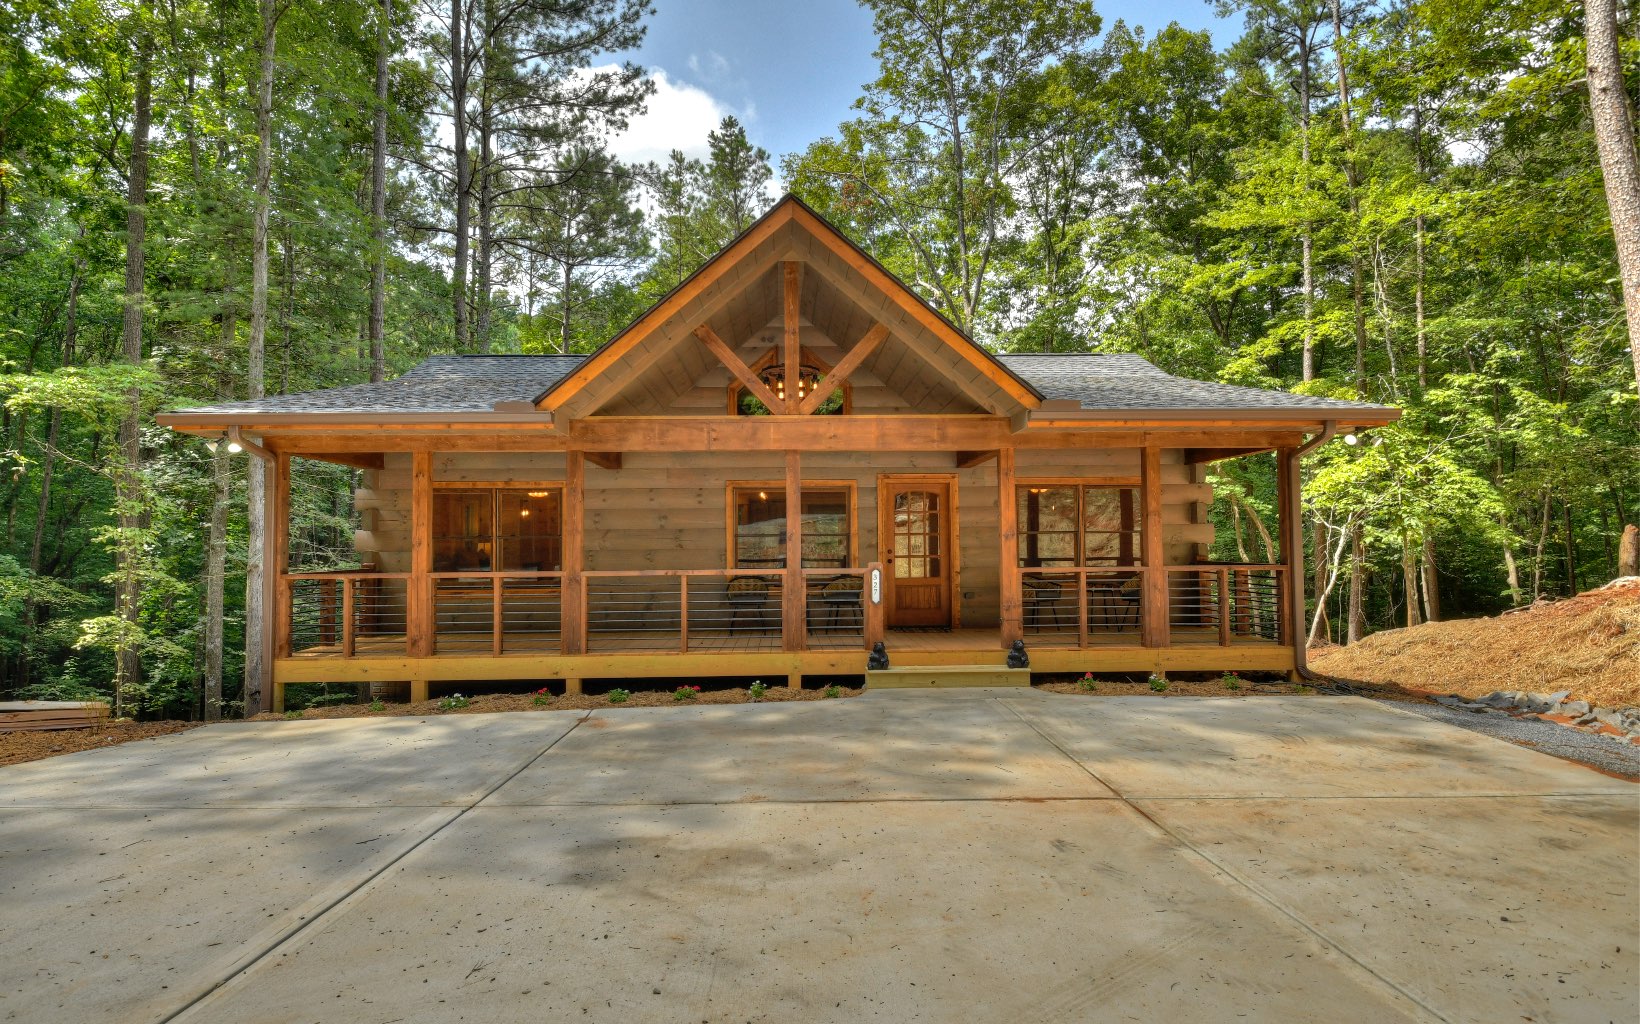 INTRODUCING THIS BEAUTIFUL AND TRANQUIL NEW CONSTRUCTION TRUE LOG CABIN! This 2 BR/2Bth cabin has it all with beautiful wood finishes throughout including circular saw hardwood flooring and cabinetry. Sandstone granite countertops and unique rustic lighting help give this cabin a mountain touch you will fall in love with. Lots of windows provide natural lighting that showcases the detailed finishes such as a rock fireplace that extends to the beamed ceilings with a large, open living area. Large, oversized covered porches with vaulted ceilings add to the outdoor space of this cabin on one of the most beautiful private and wooded lots in Coosawattee. The large backyard is perfect for outdoor activities and enjoying nature. This cabin is nestled among towering hardwood trees & close to downtown Ellijay. Close to downtown Ellijay, vacation rentals allowed, and lots of amenities in this gated community!